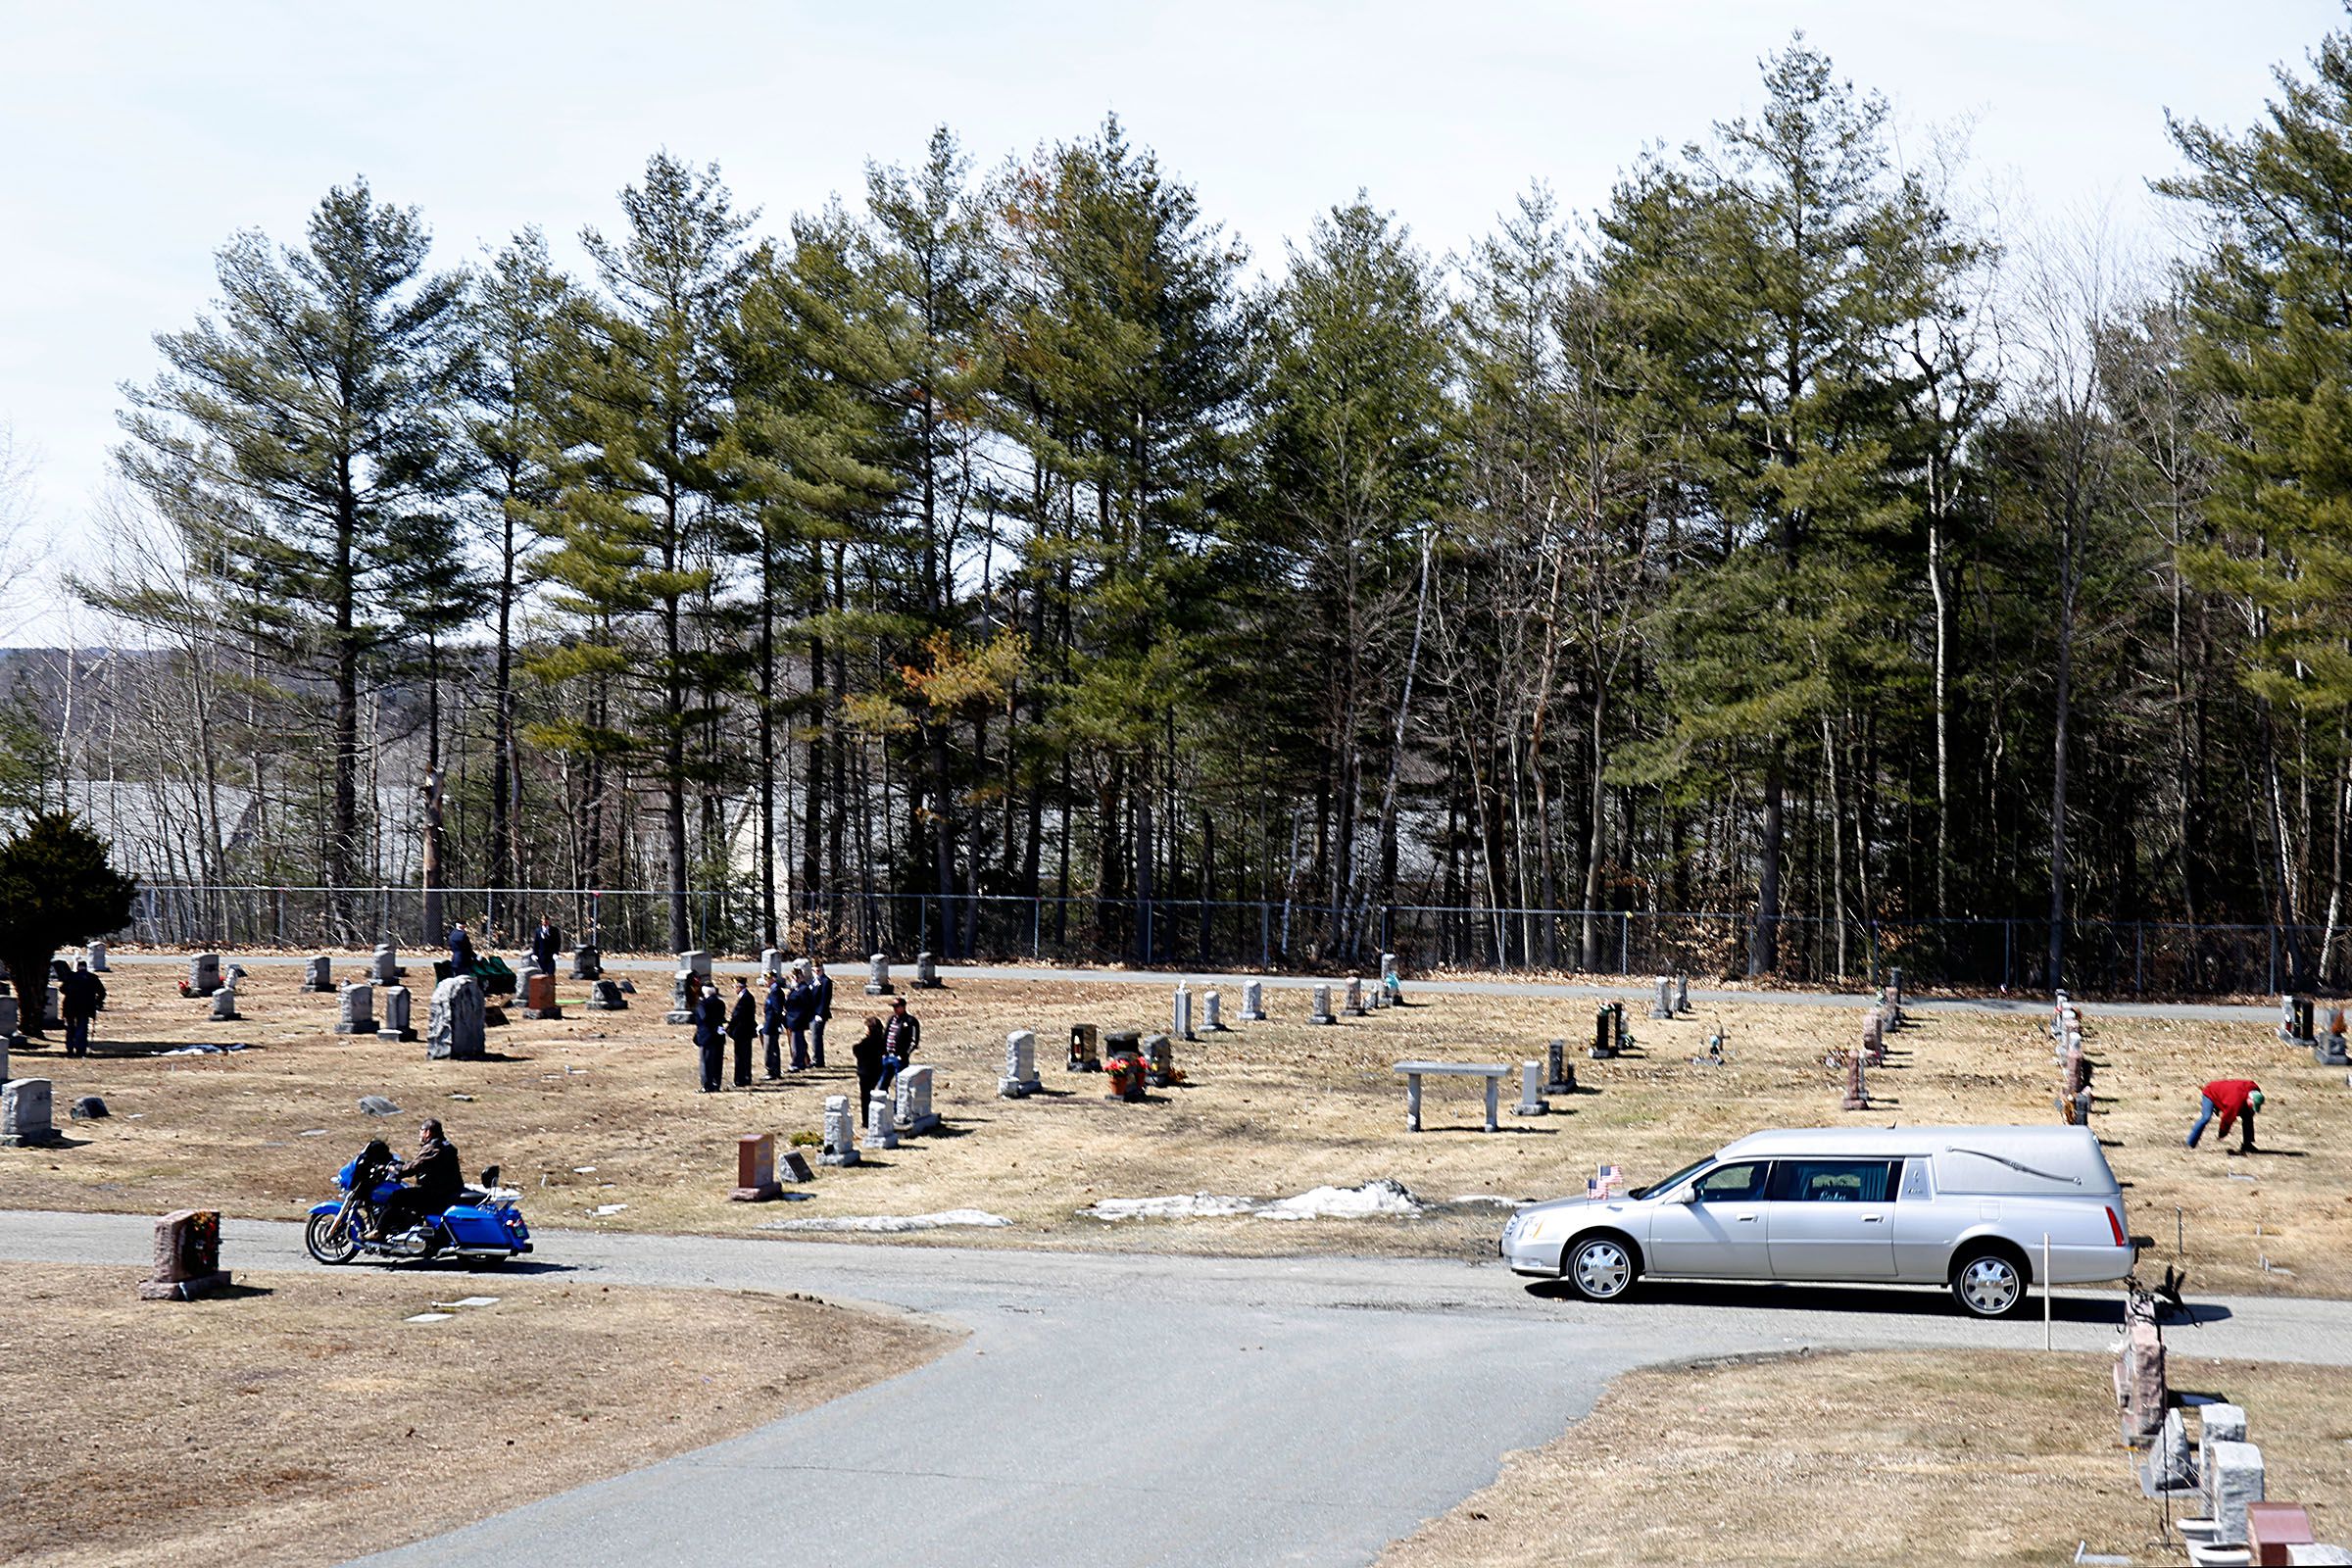 Members of the Upper Valley chapter of the Harley Owners Group lead the funeral procession for Fay "Woody" Woodward, of Sunapee, N.H., into the Sacred Heart Cemetery in Lebanon, N.H., on April 2, 2019. Except for Hawaii, Woodward had been to every state in the country on his motorcycle. (Valley News - Geoff Hansen) Copyright Valley News. May not be reprinted or used online without permission. Send requests to permission@vnews.com.